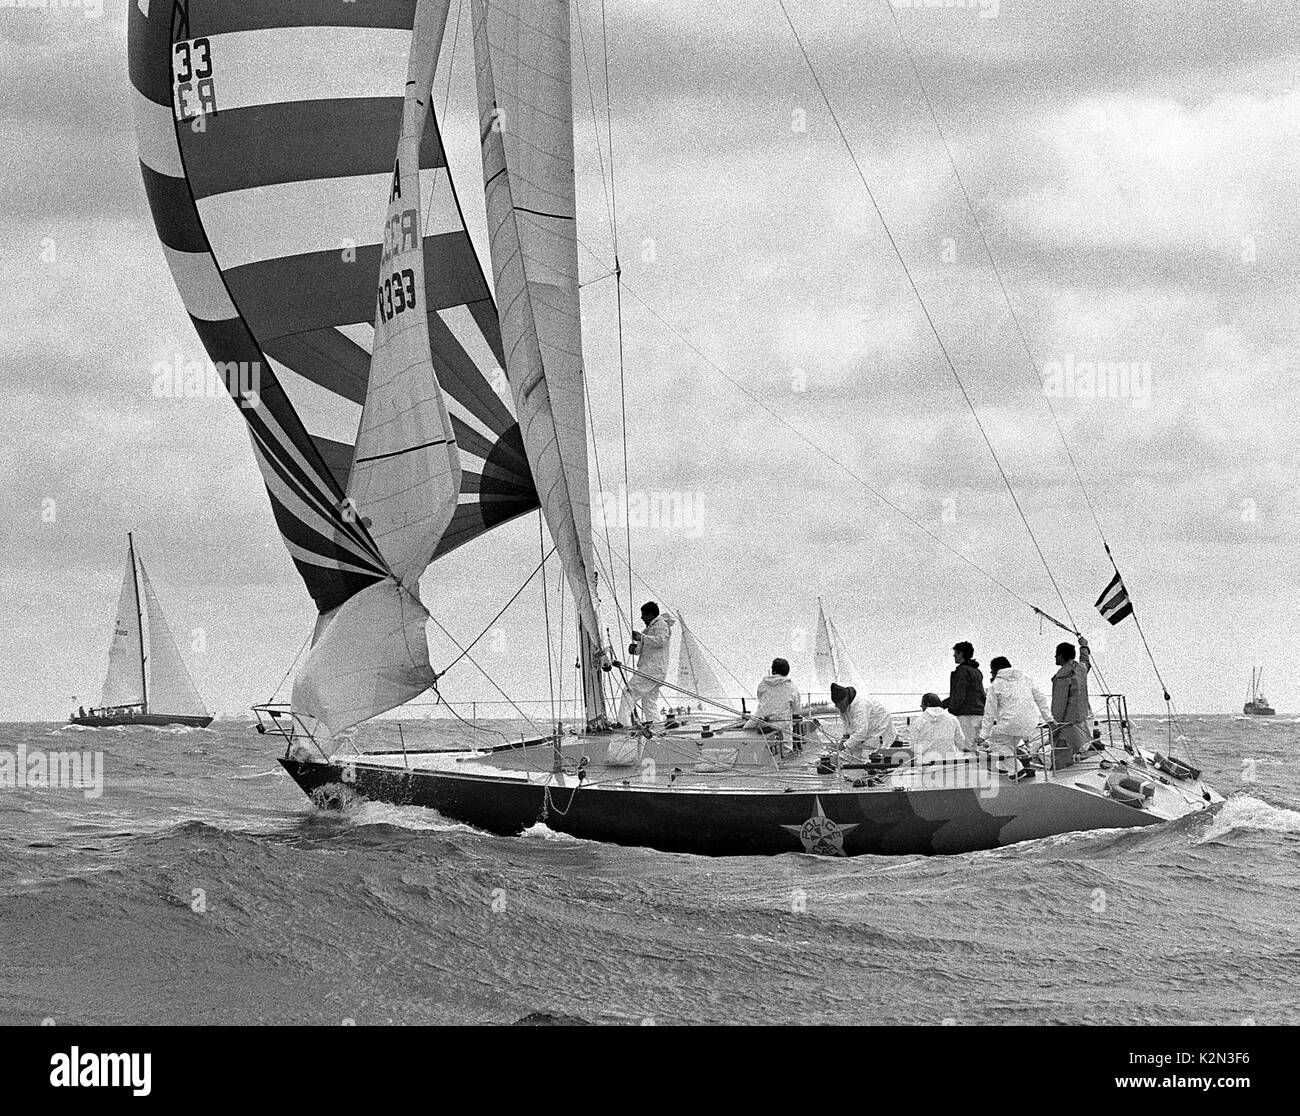 AJAXNETPHOTO. 1979. SOLENT, ENGLAND. - ADMIRAL'S CUP SOLENT INSHORE RACE - POLICE CAR - AUSTRALIA, SKIPPERED BY PETER CANTWELL. PHOTO:JONATHAN EASTLAND/AJAX REF:79 2006 Stock Photo